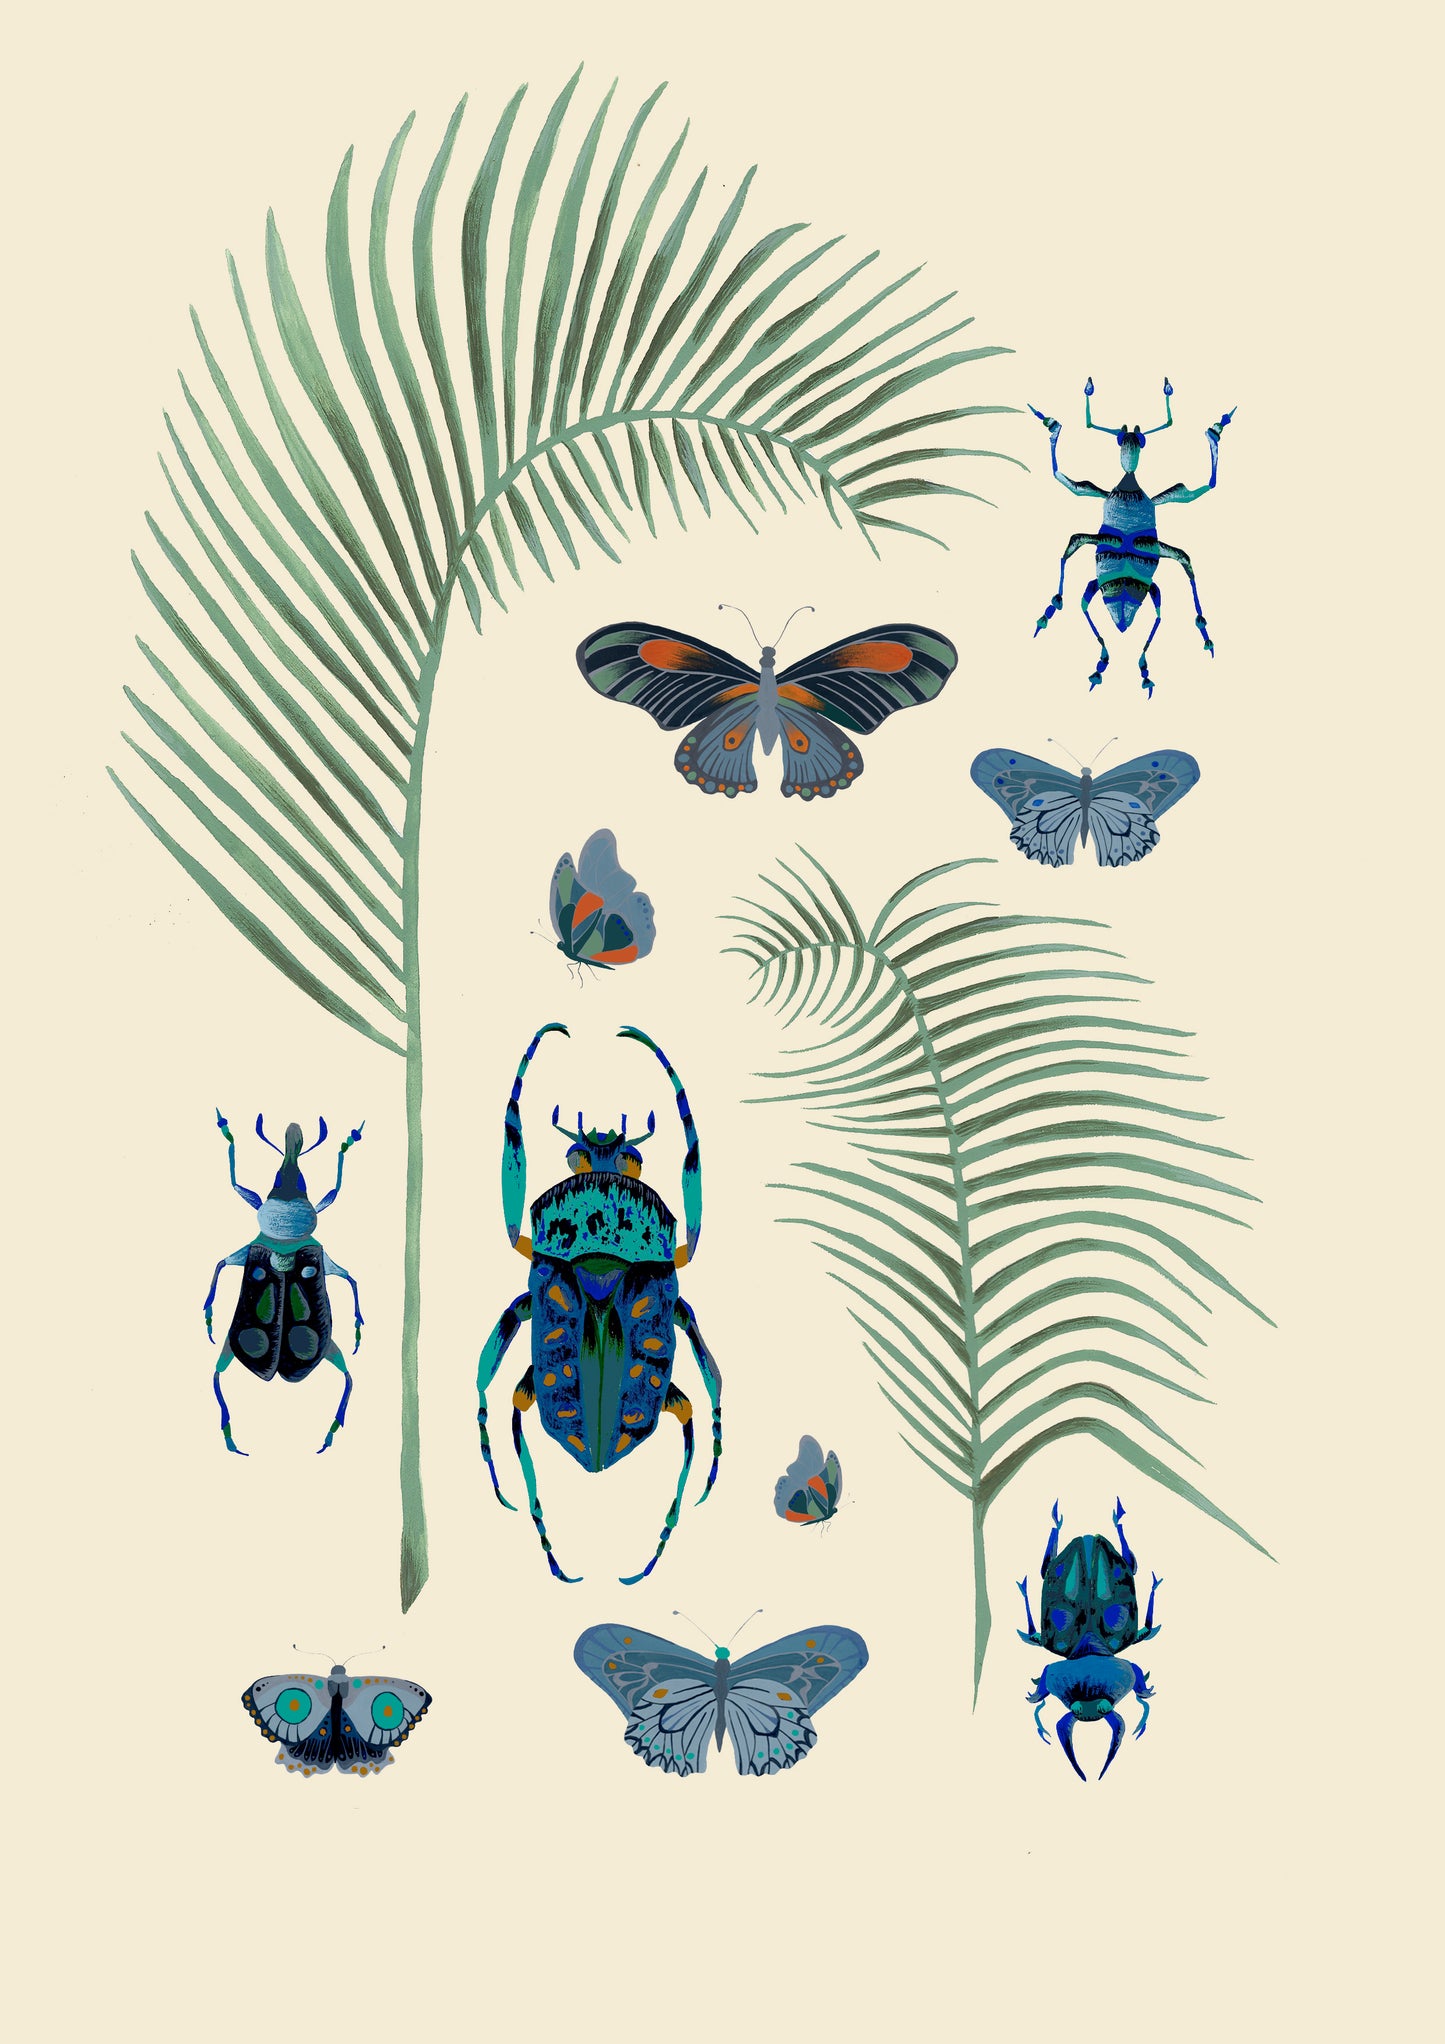 Insects and Palm Leaves A4 Art Print